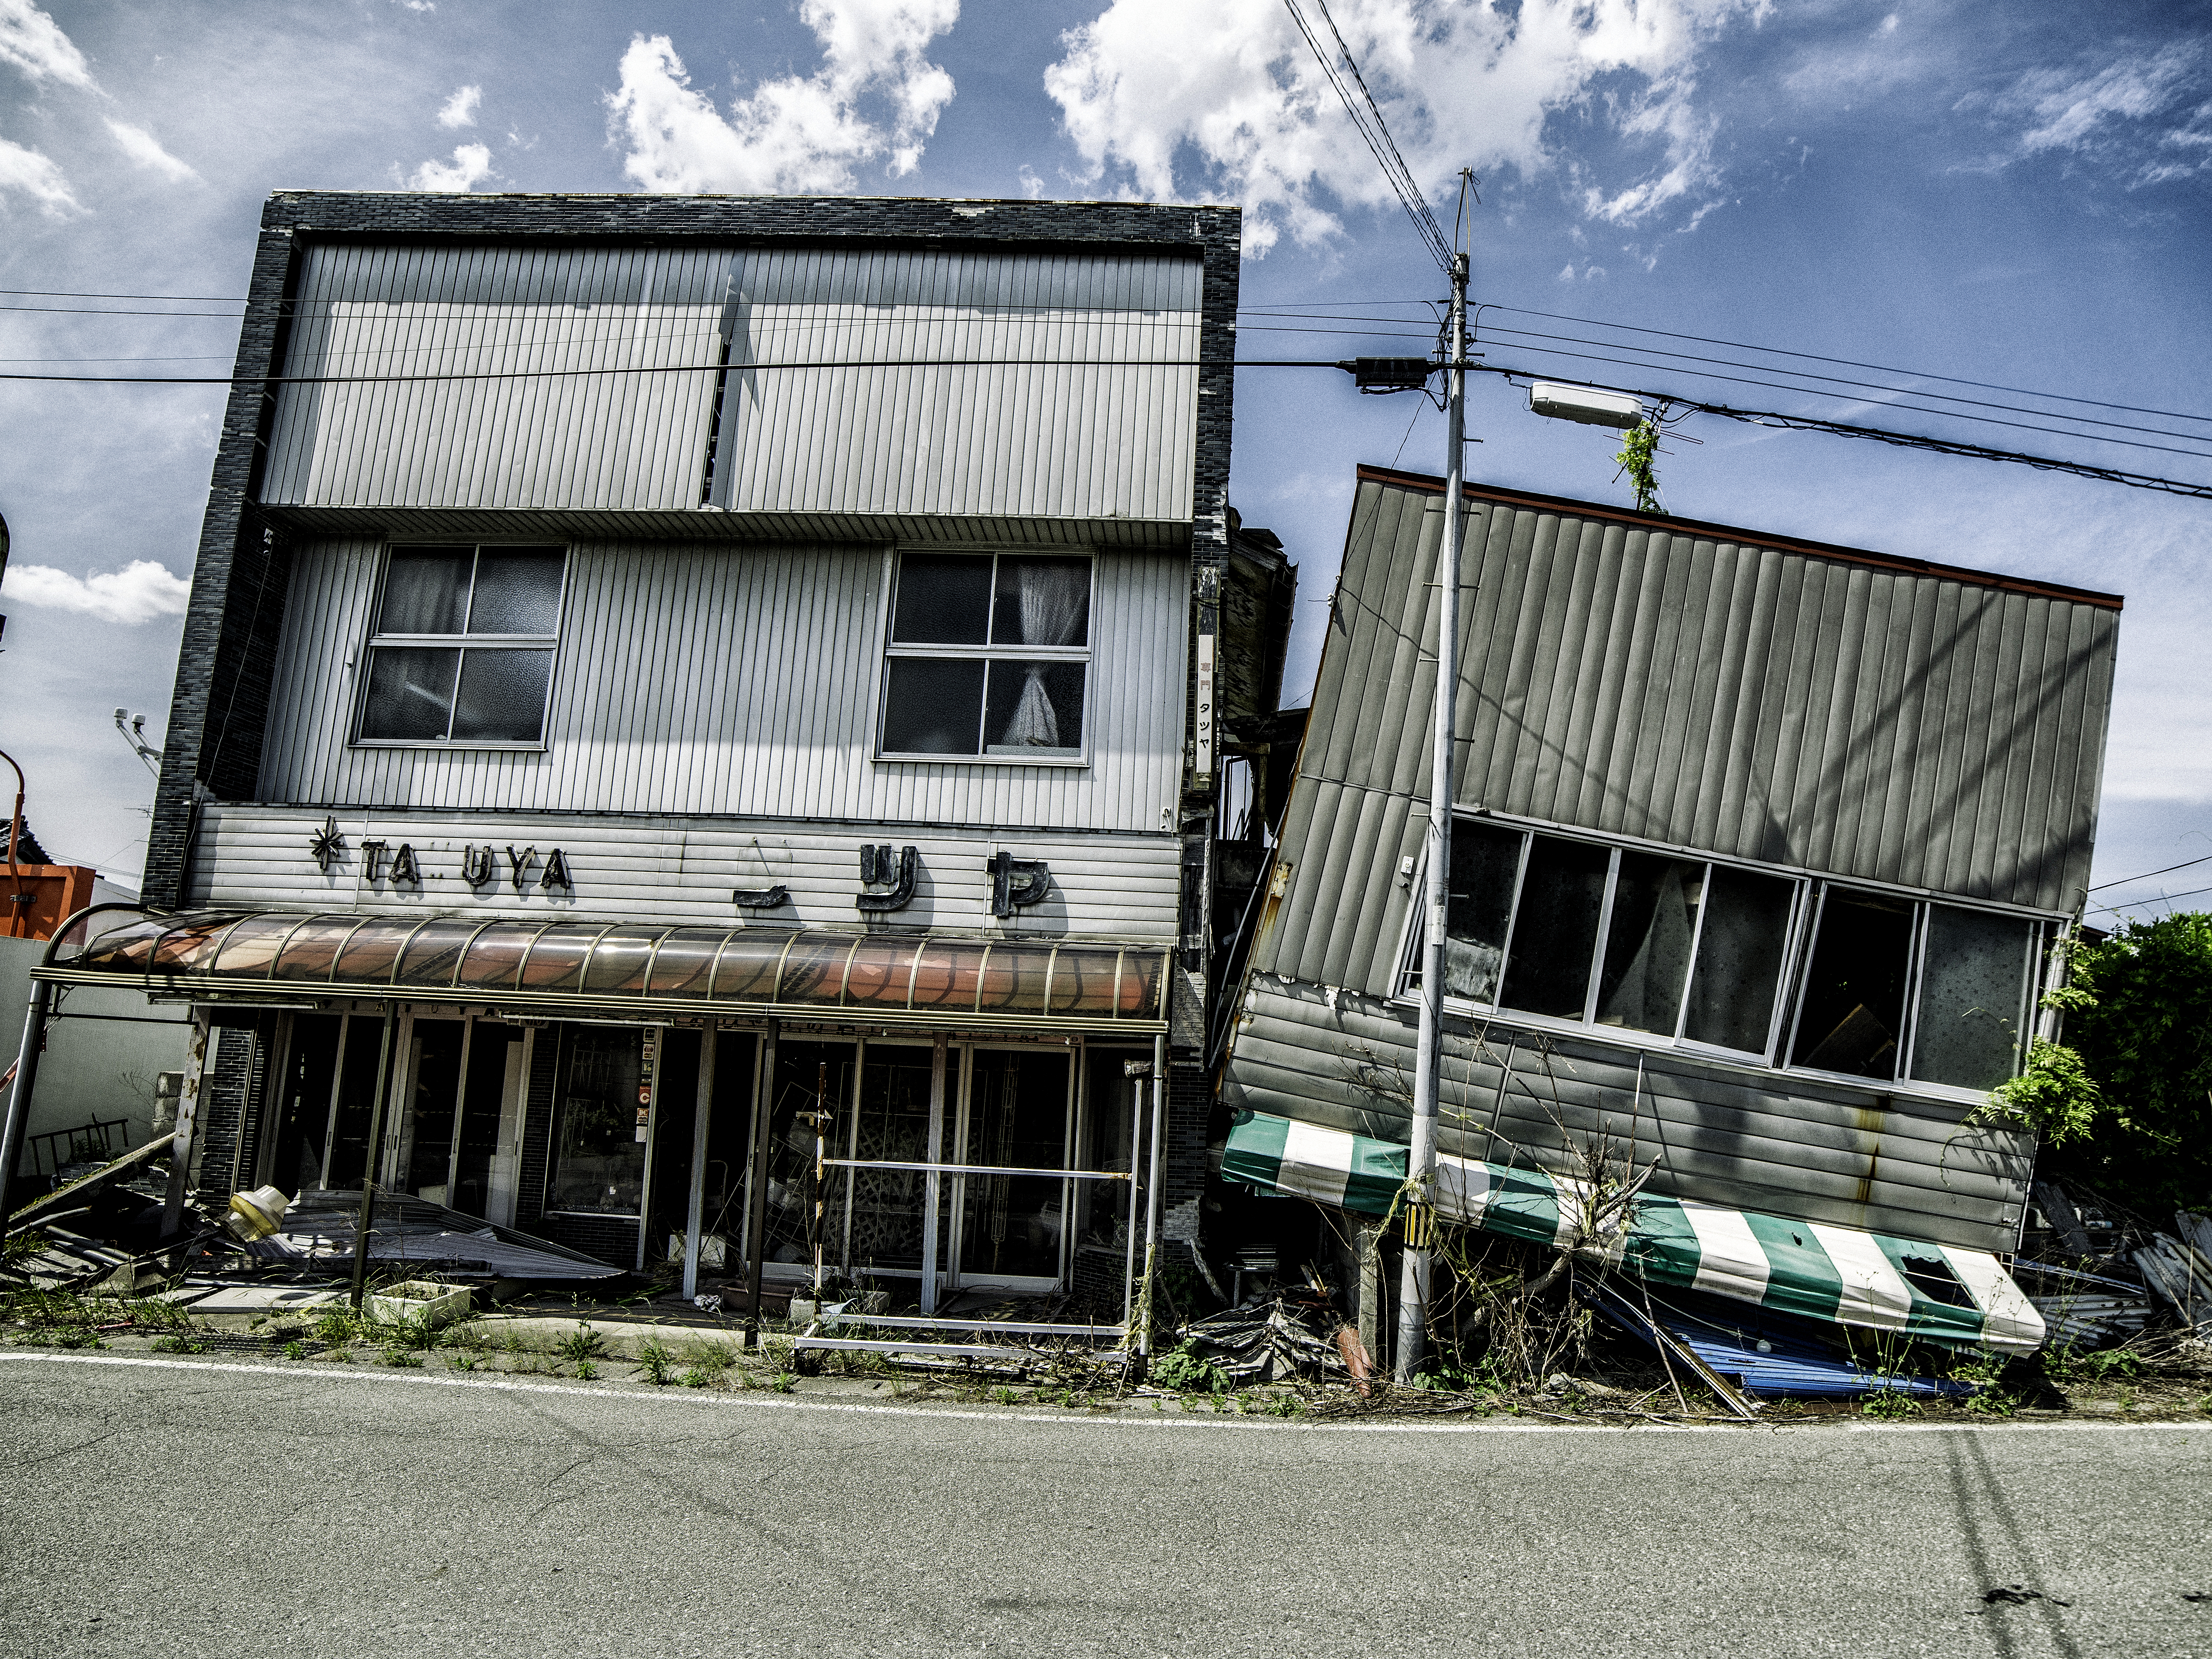 Buildings are collapsed in Tamioka.